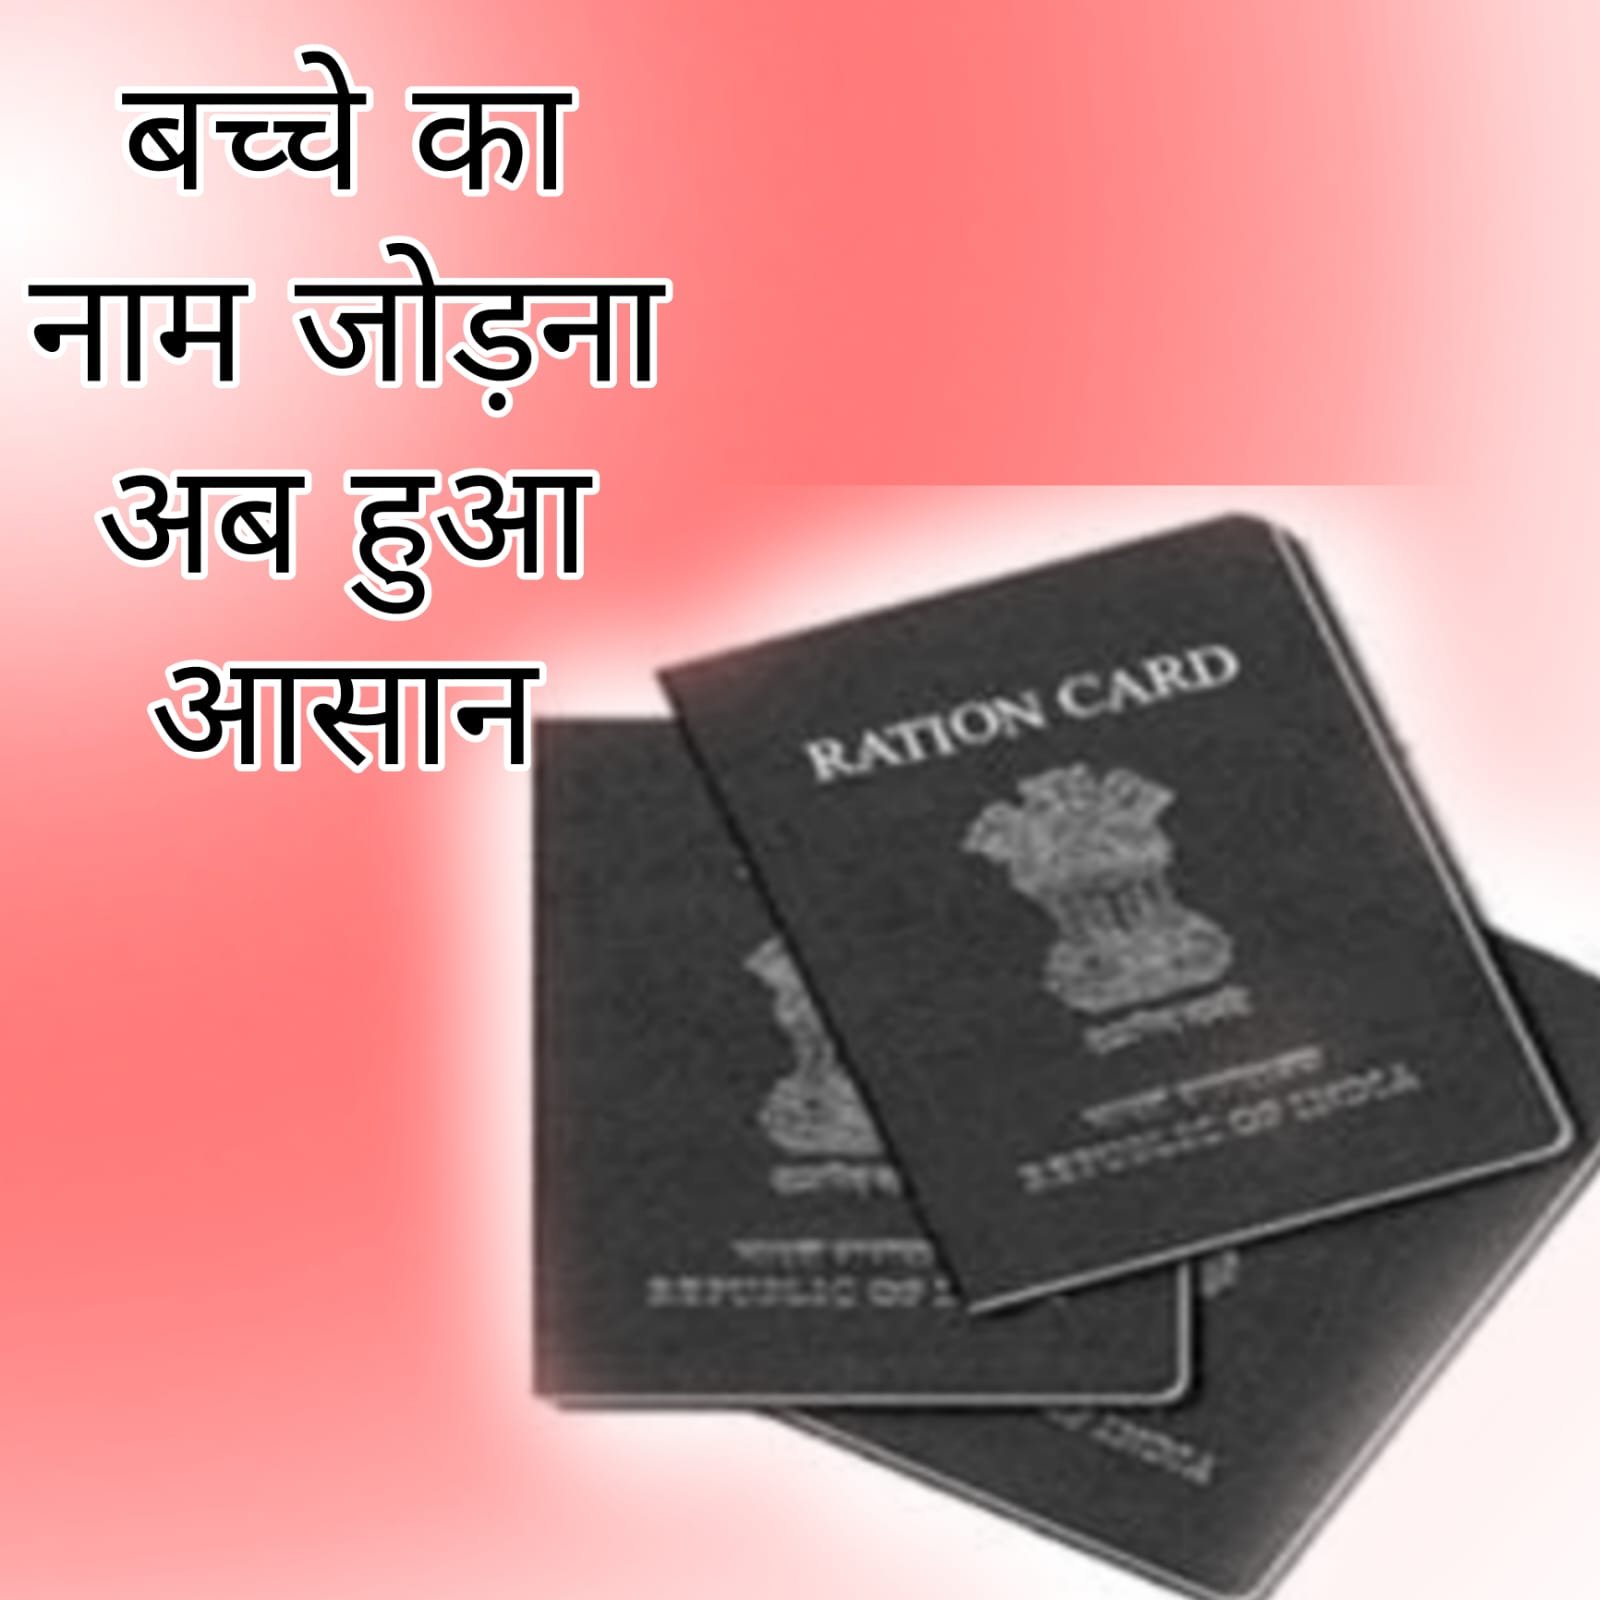 Ration Card - It is now easy to add child's name in the ration card.